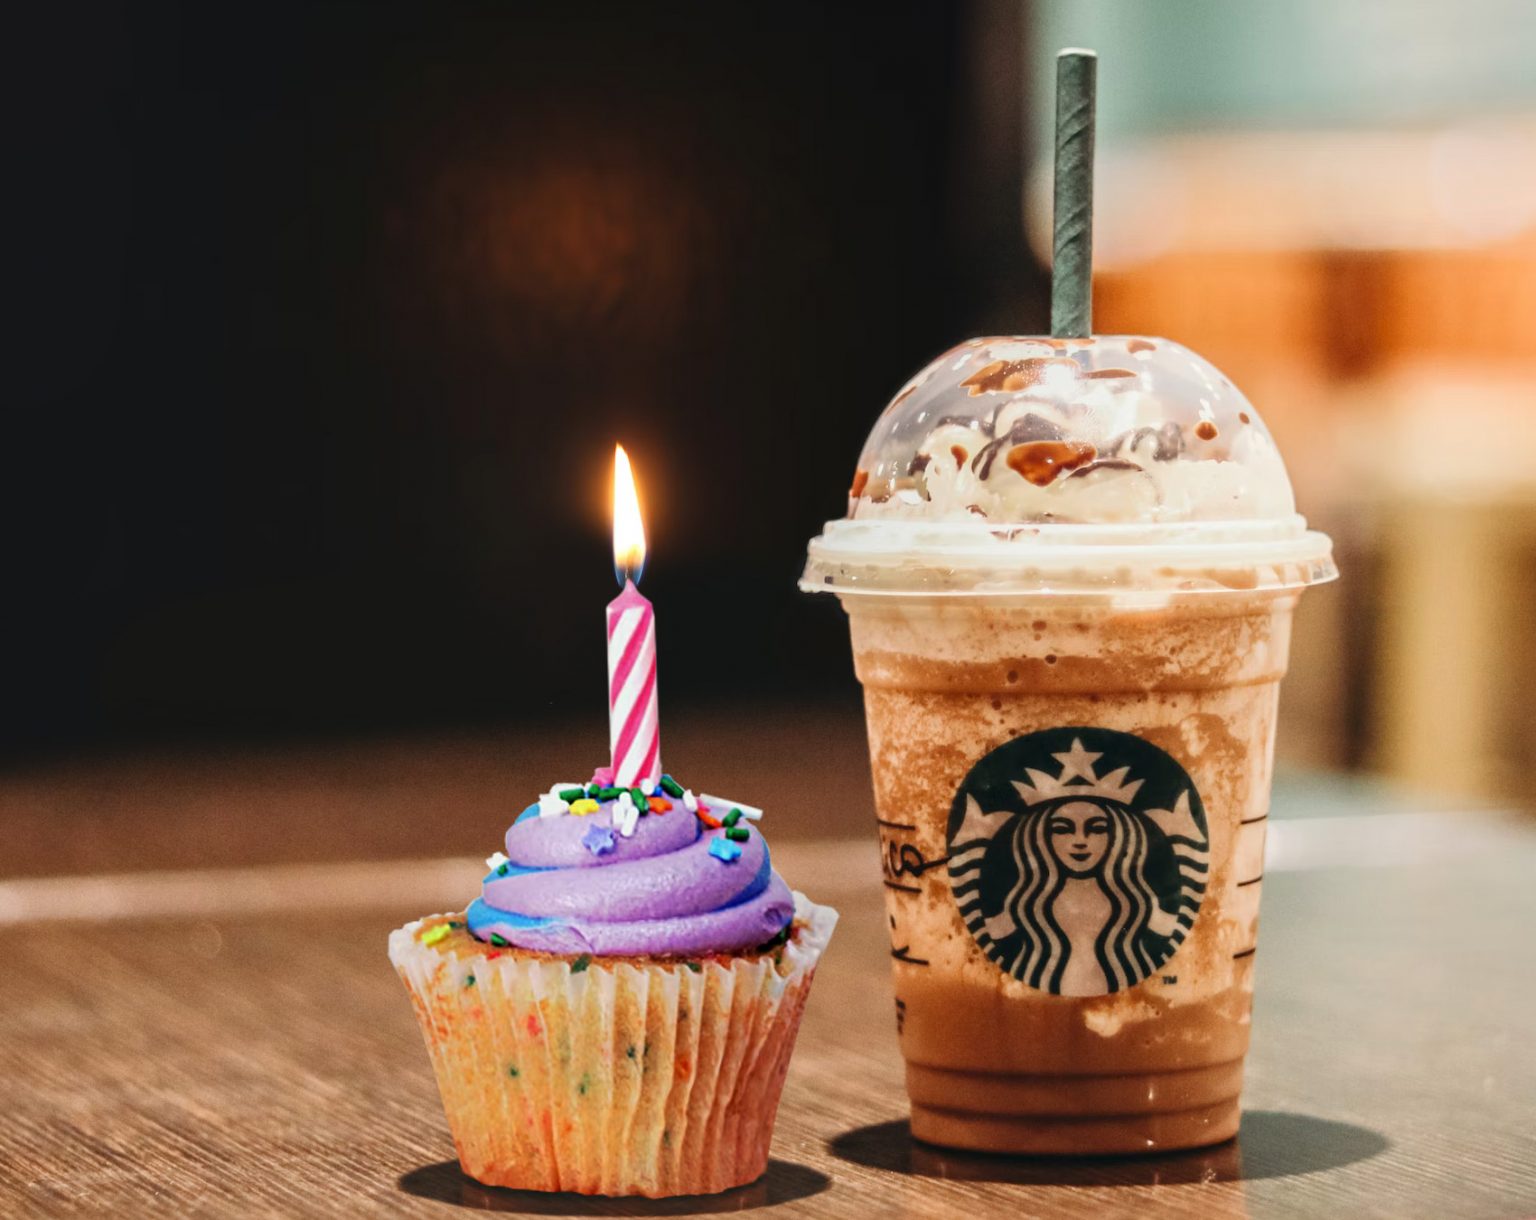 Can You Get Free Starbucks On Your Birthday